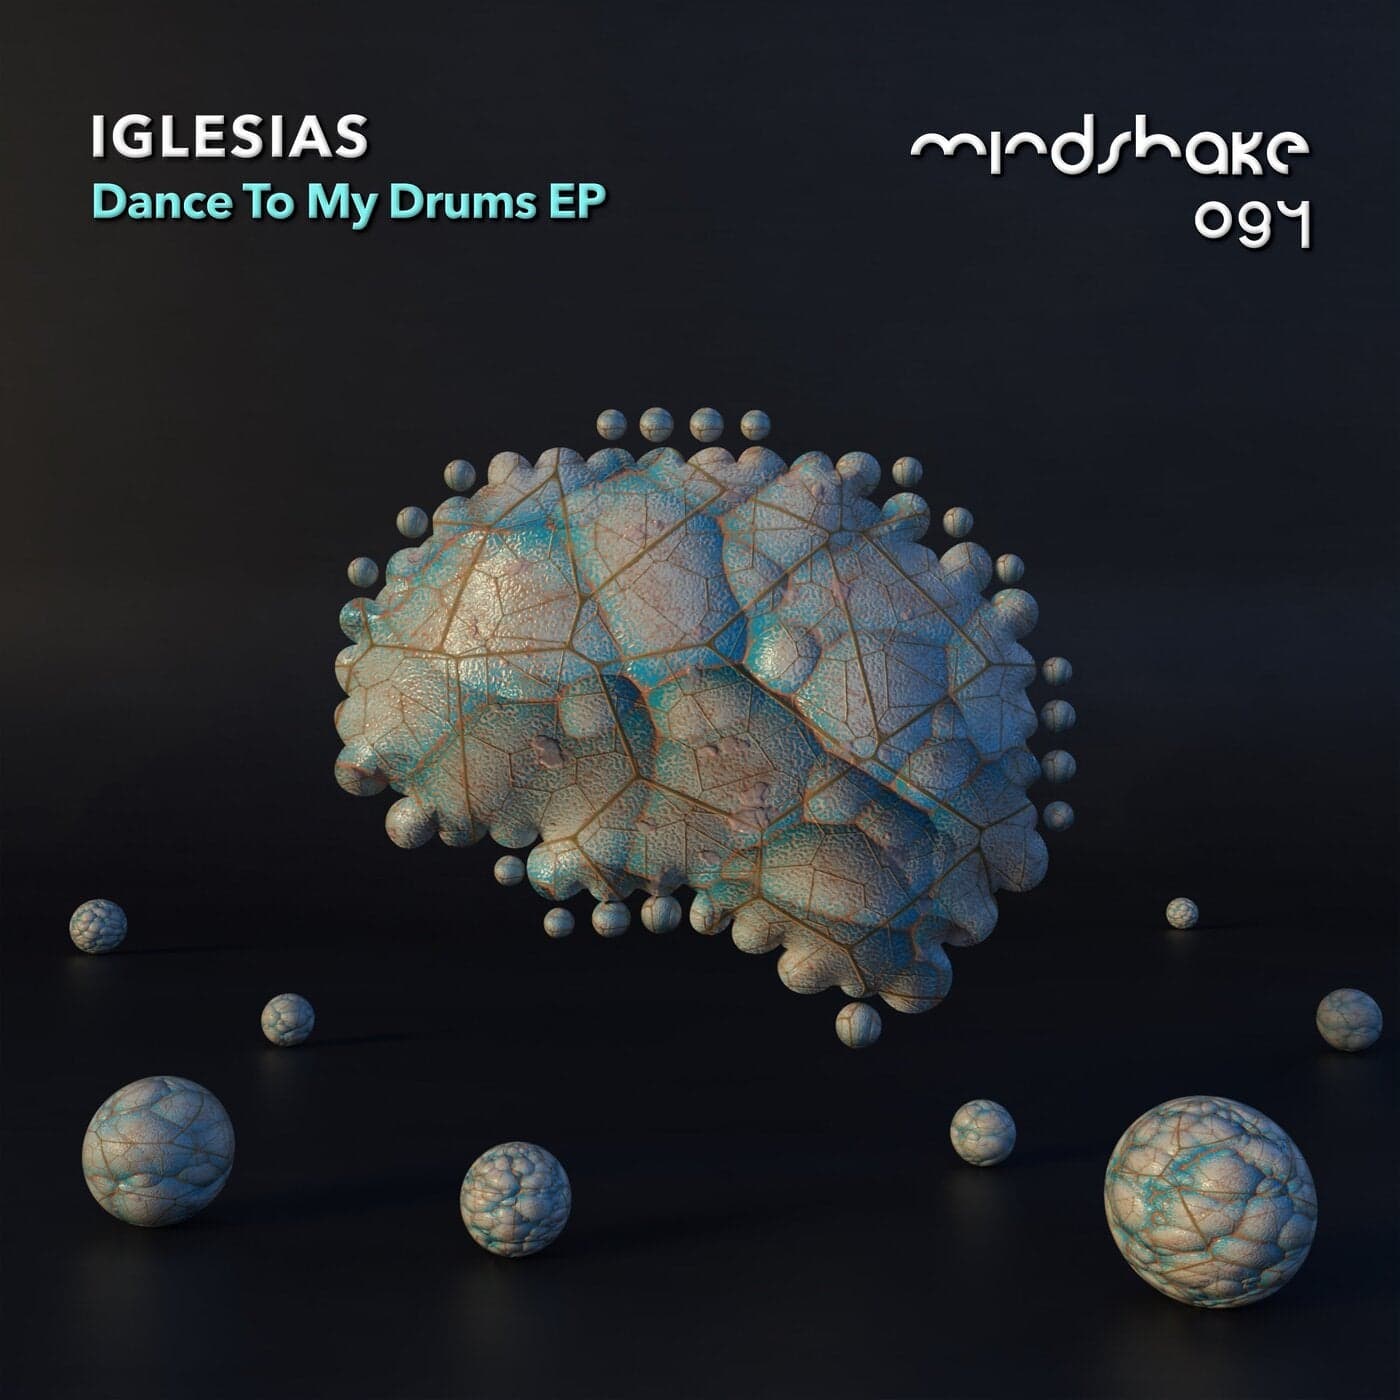 image cover: Iglesias - Dance To My Drums / MINDSHAKE094